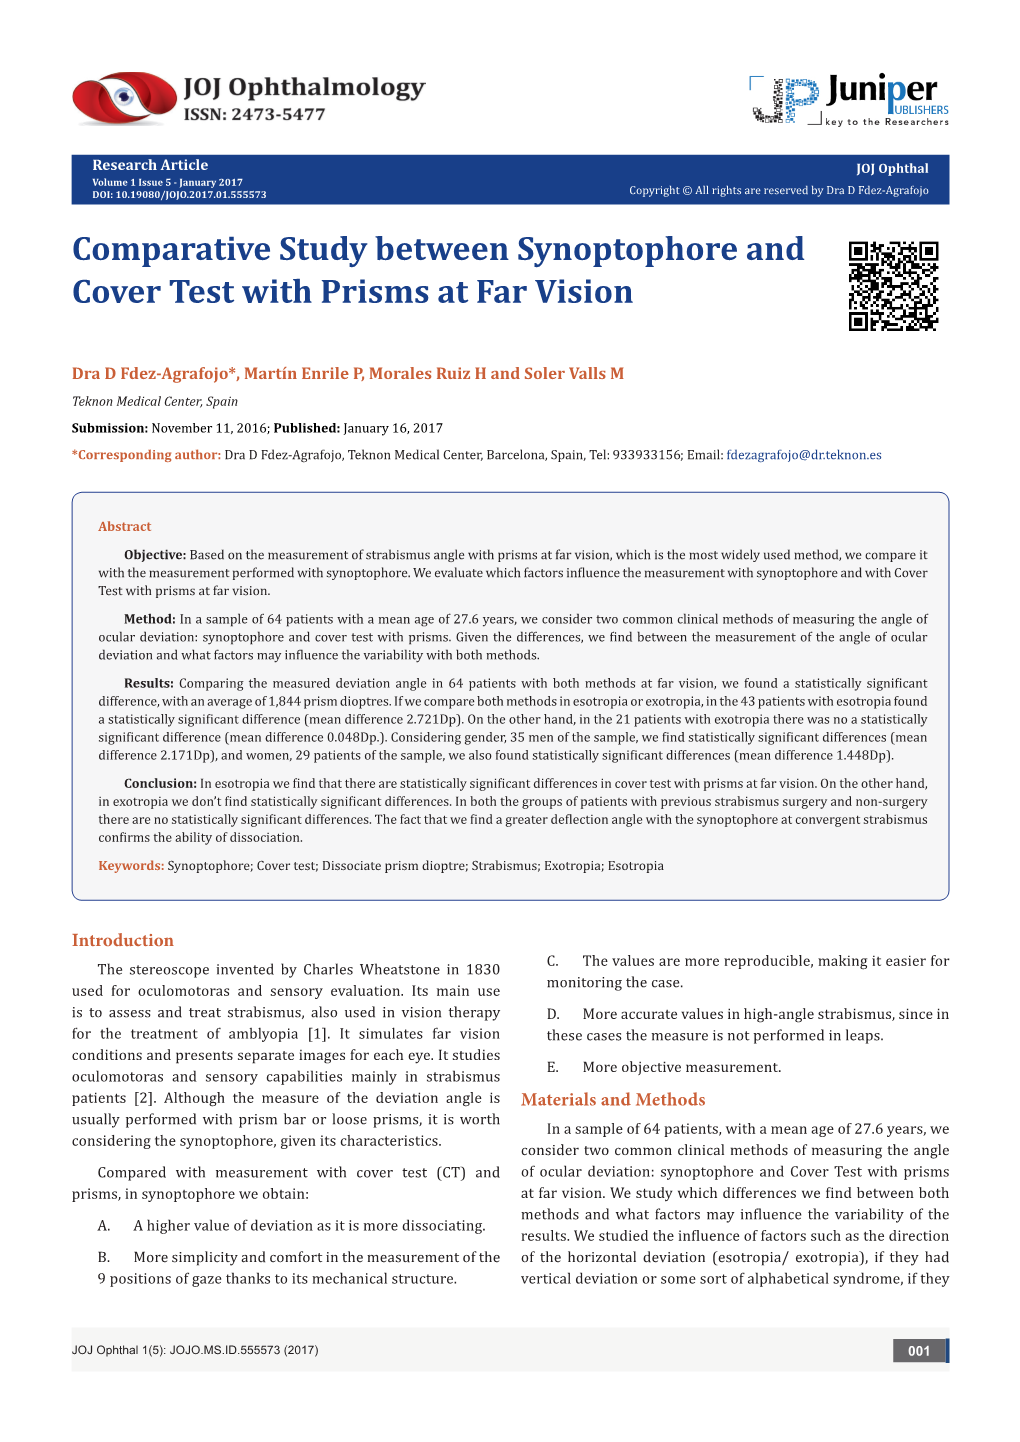 Comparative Study Between Synoptophore and Cover Test with Prisms at Far Vision